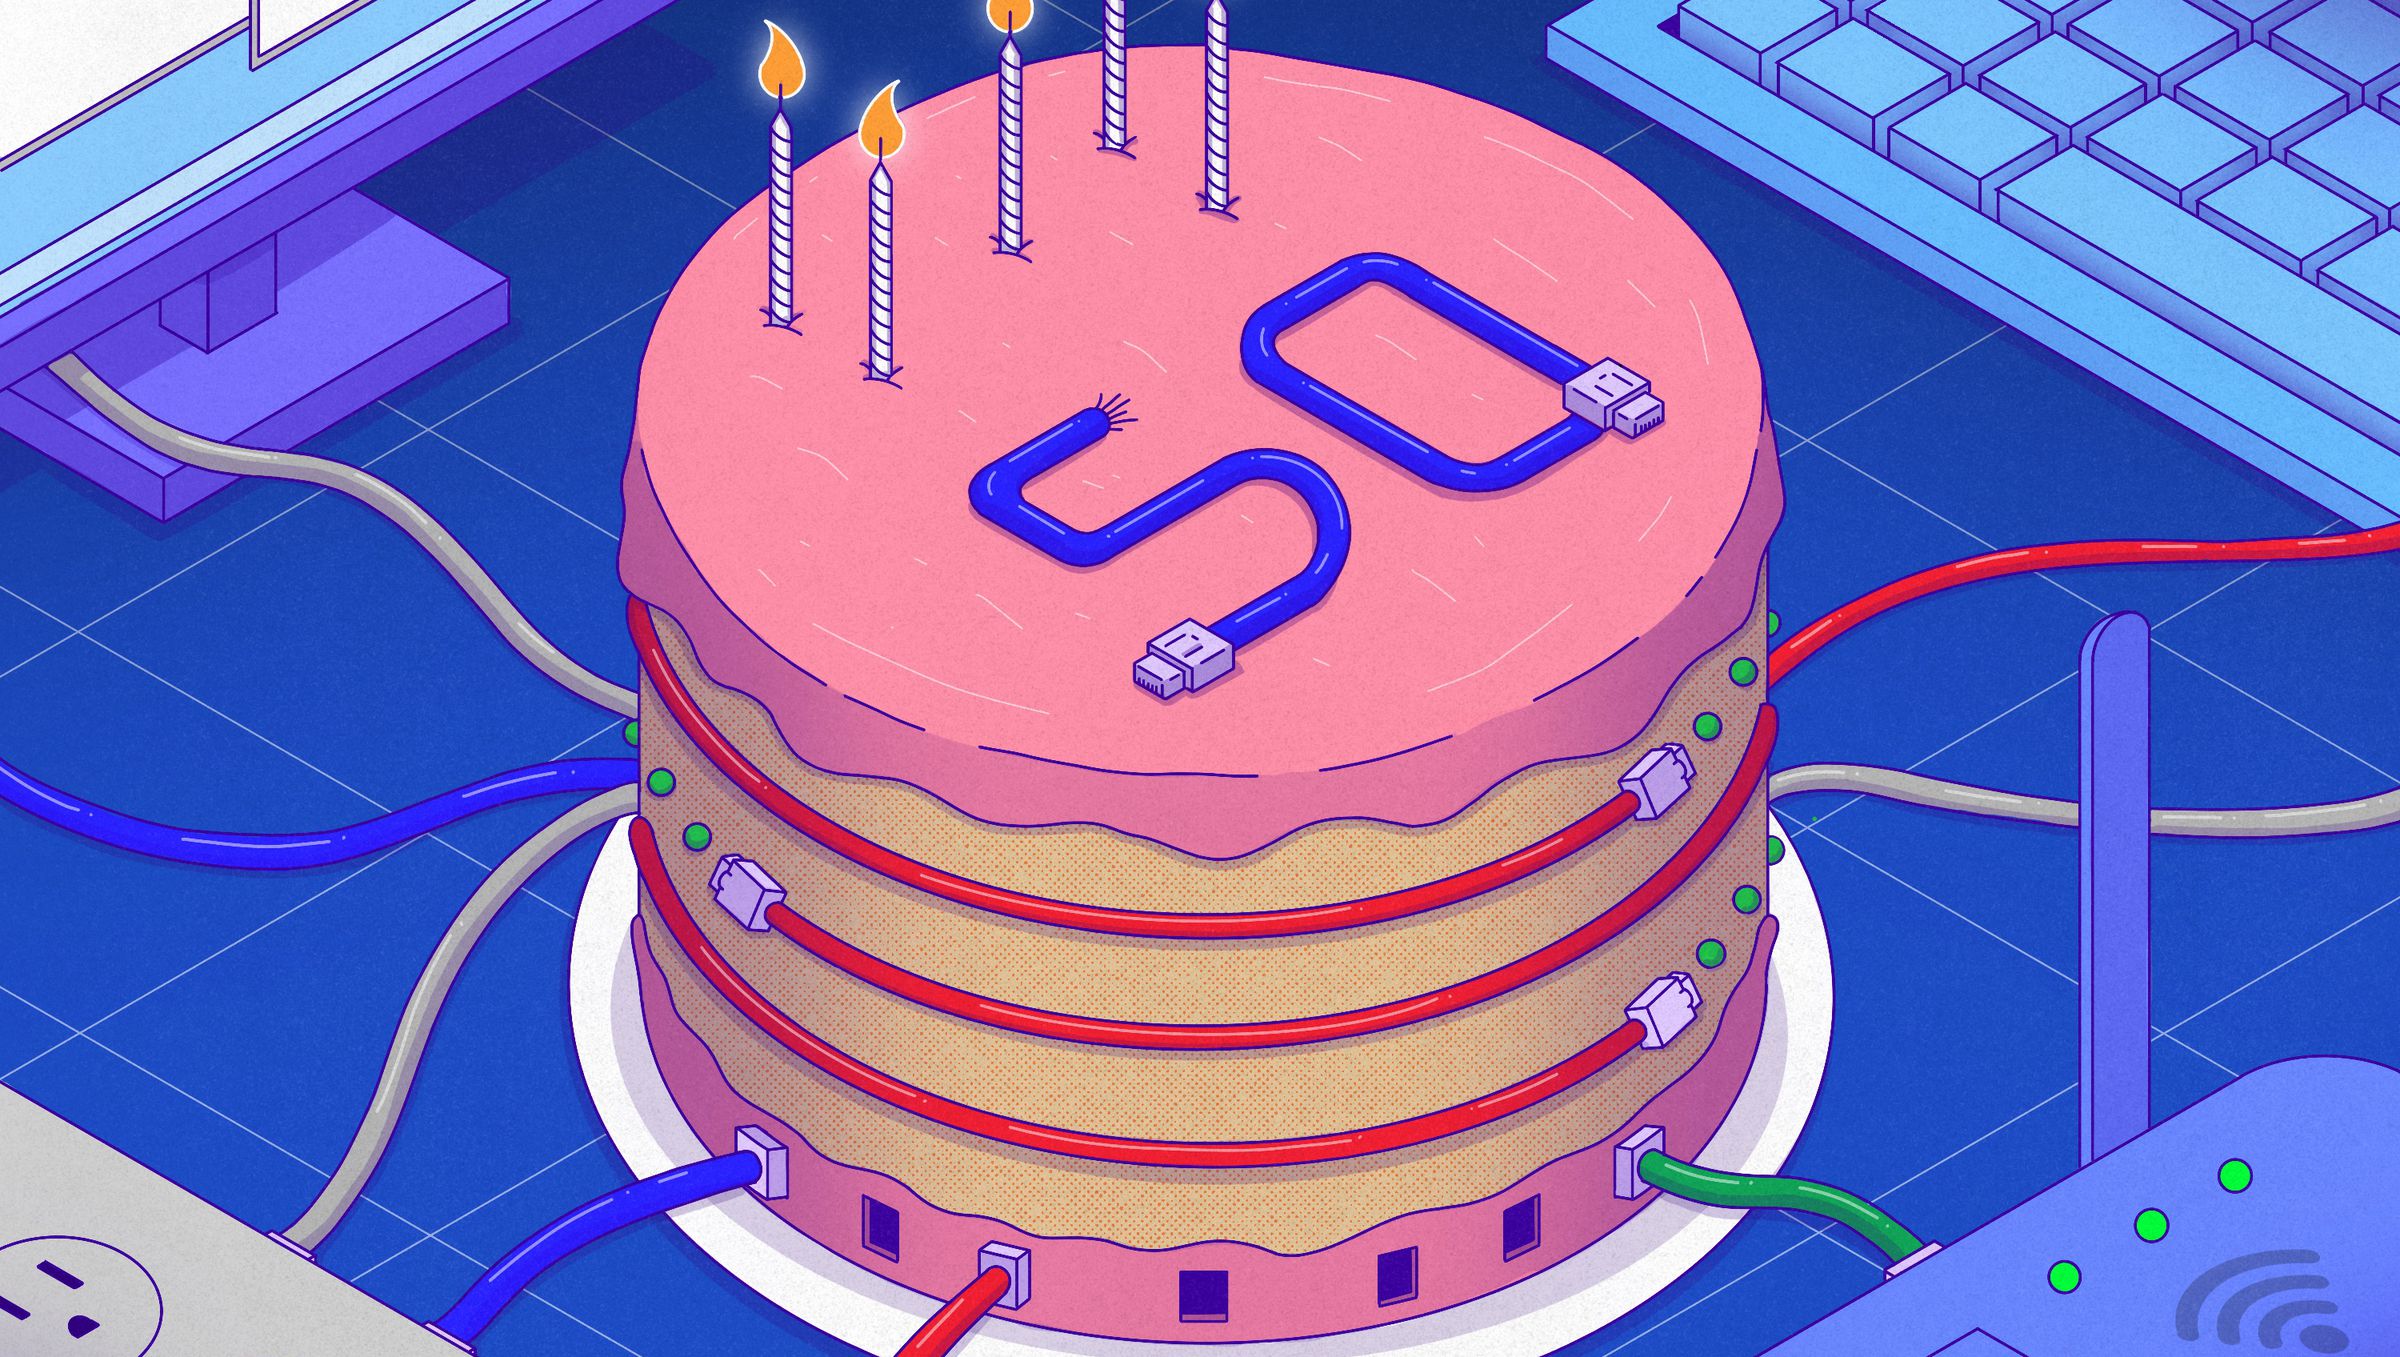 An illustrated birthday cake with the number fifty spelled out with ethernet cables, surrounded by a keyboard, WiFi router, computer monitor, and other ethernet cables.